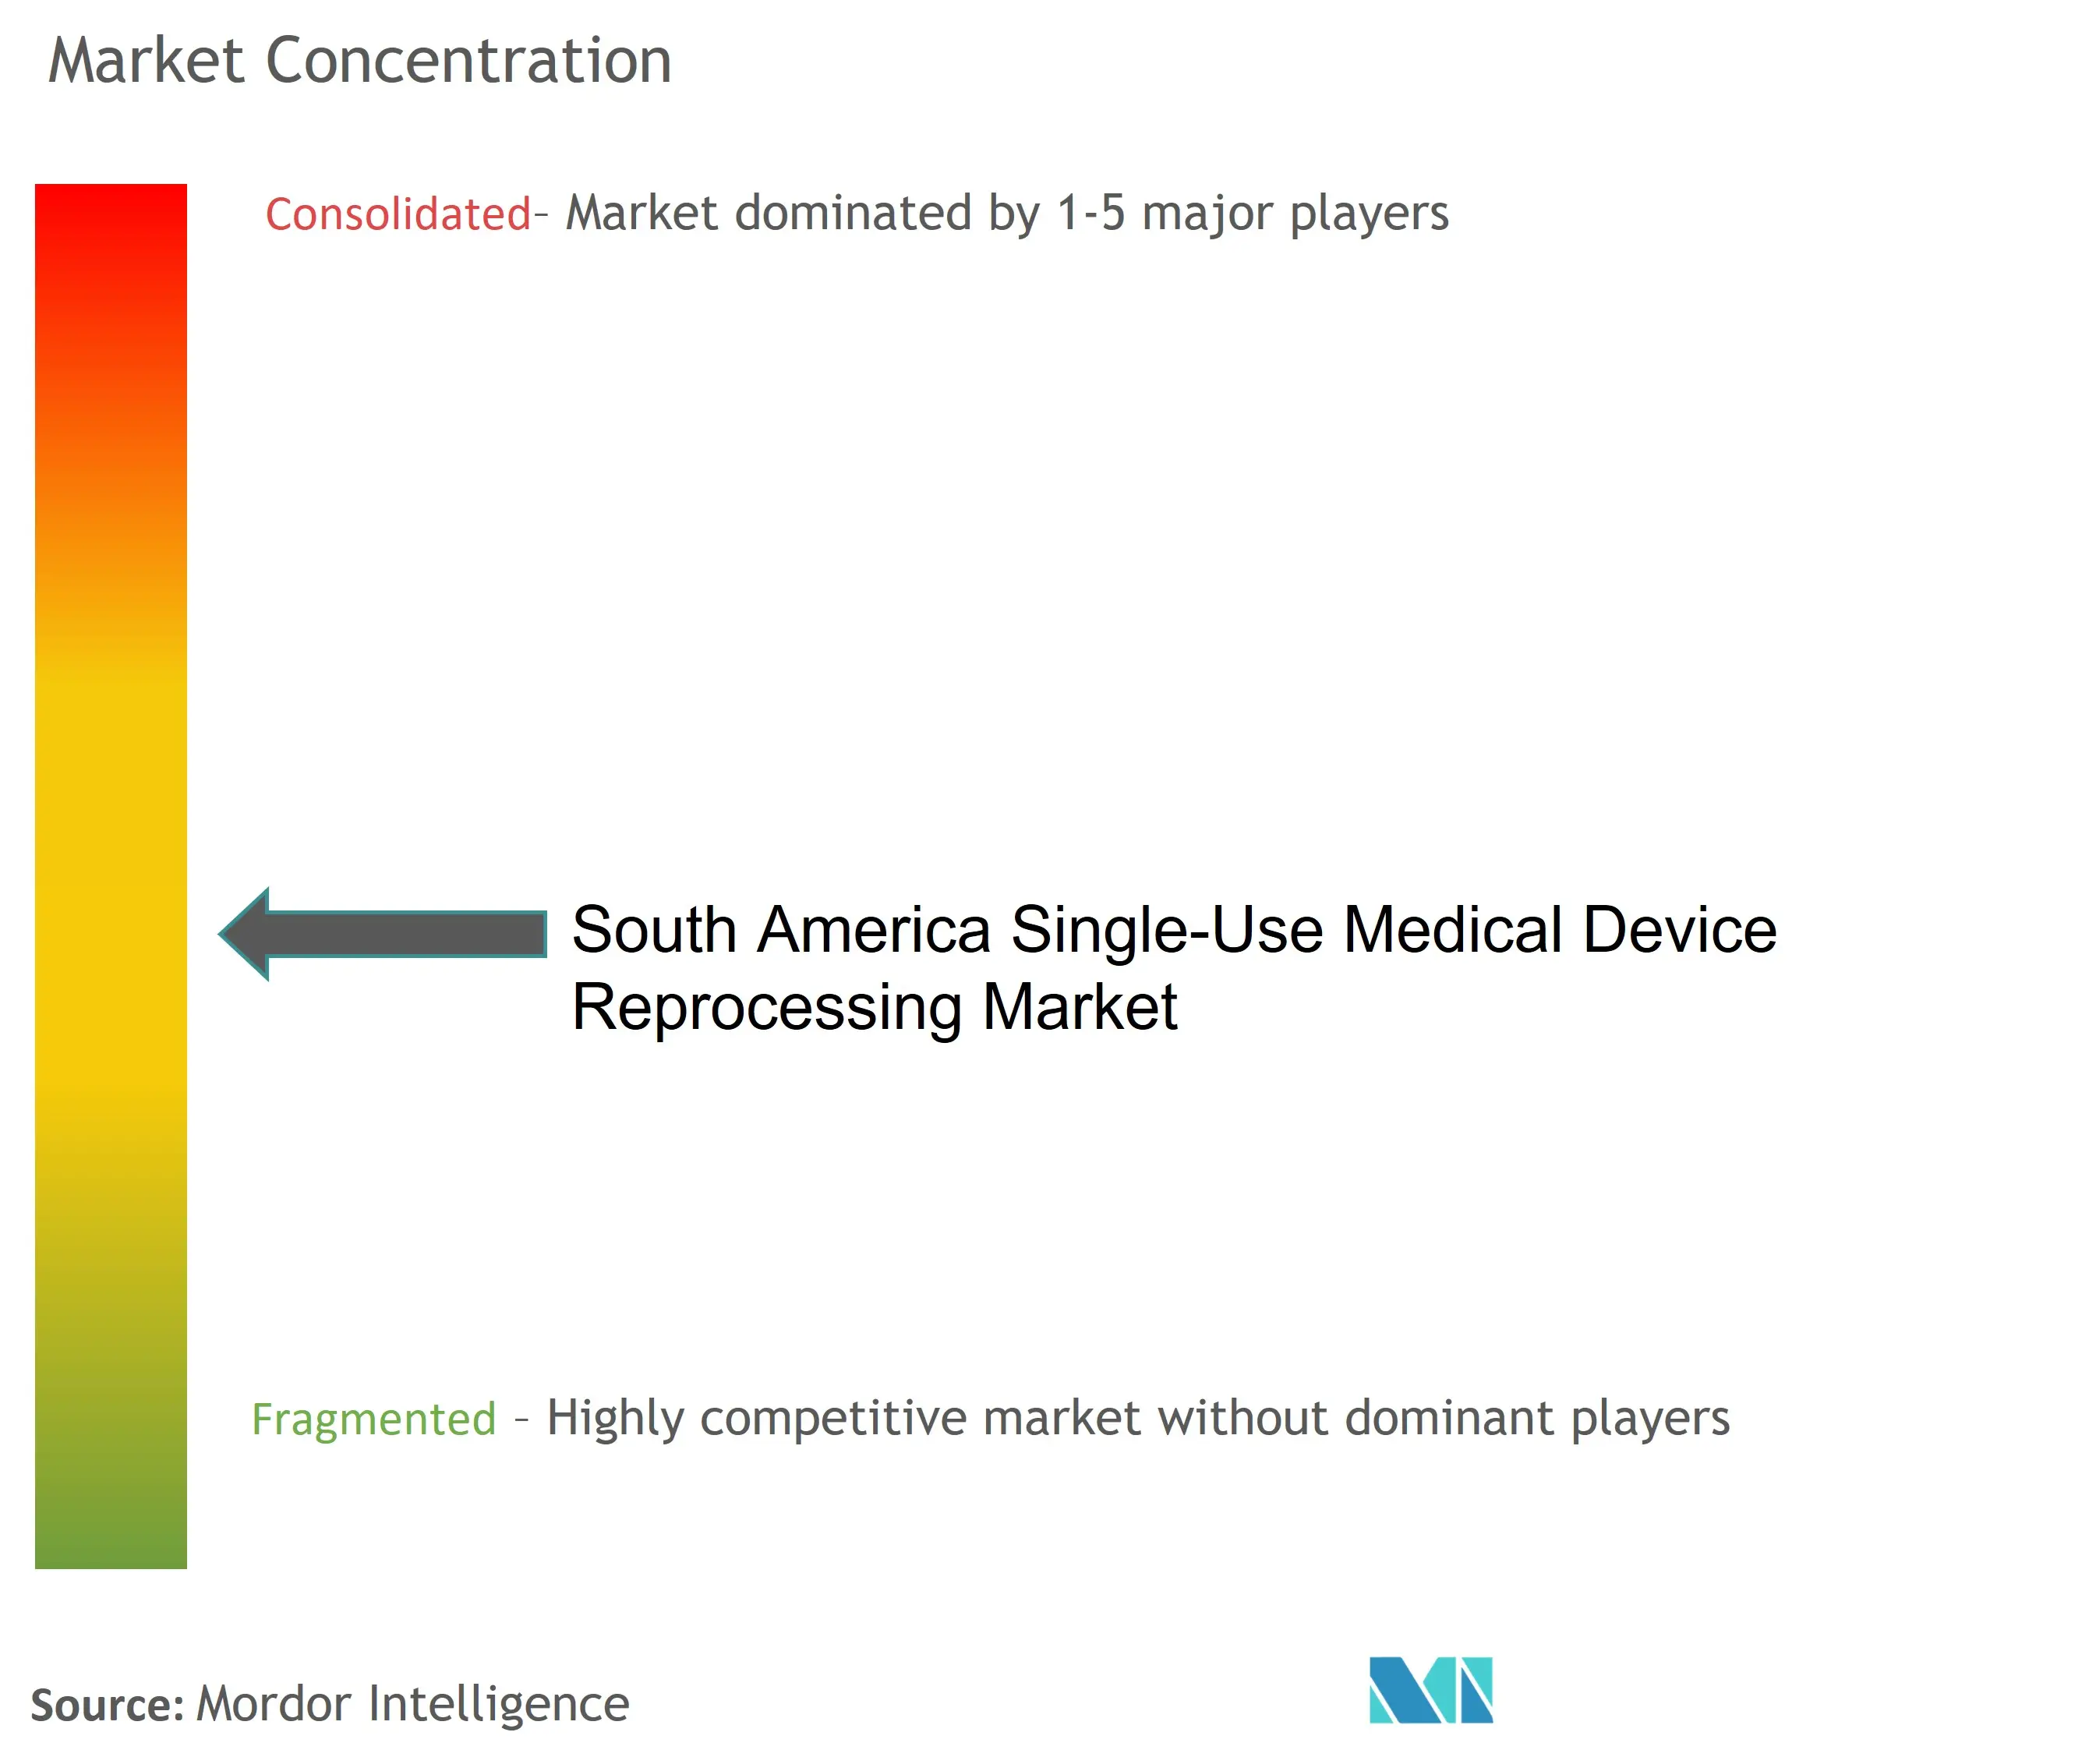 South America Single-Use Medical Device Reprocessing Market Concentration